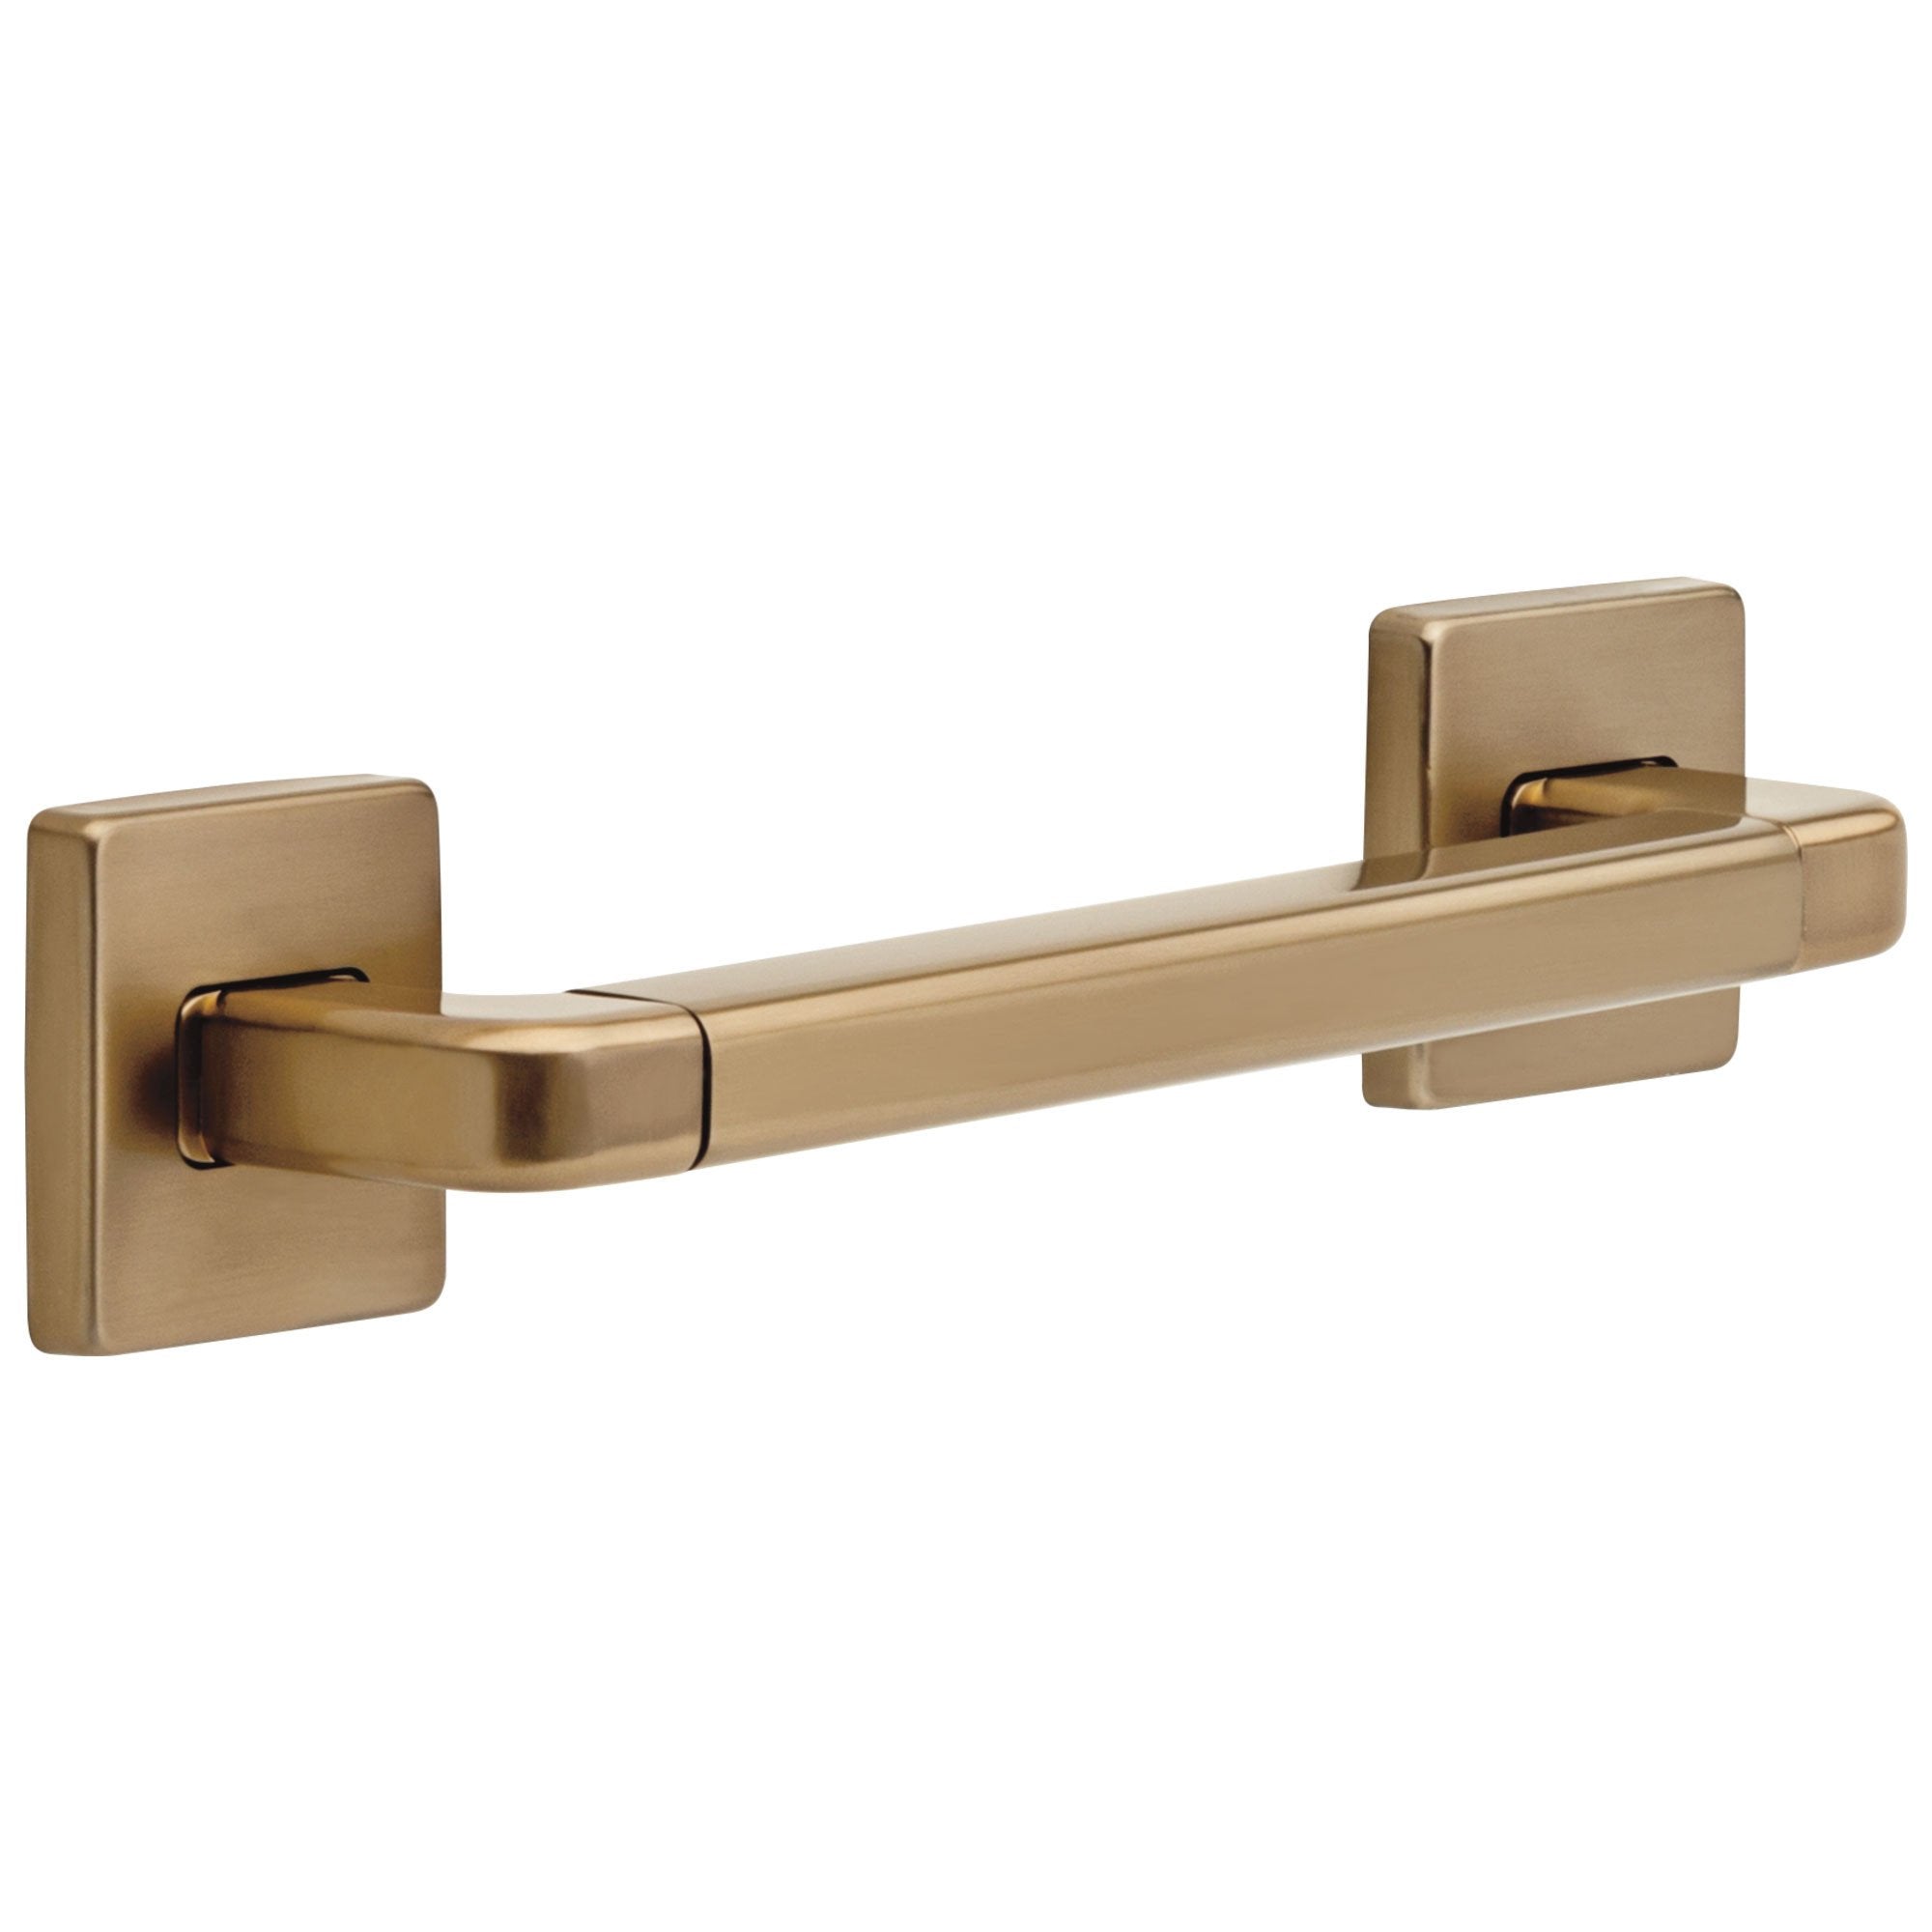 Delta Bath Safety Collection Champagne Bronze Finish Angular Modern Decorative Wall Mounted 12" Short ADA Approved Grab Bar D41912CZ